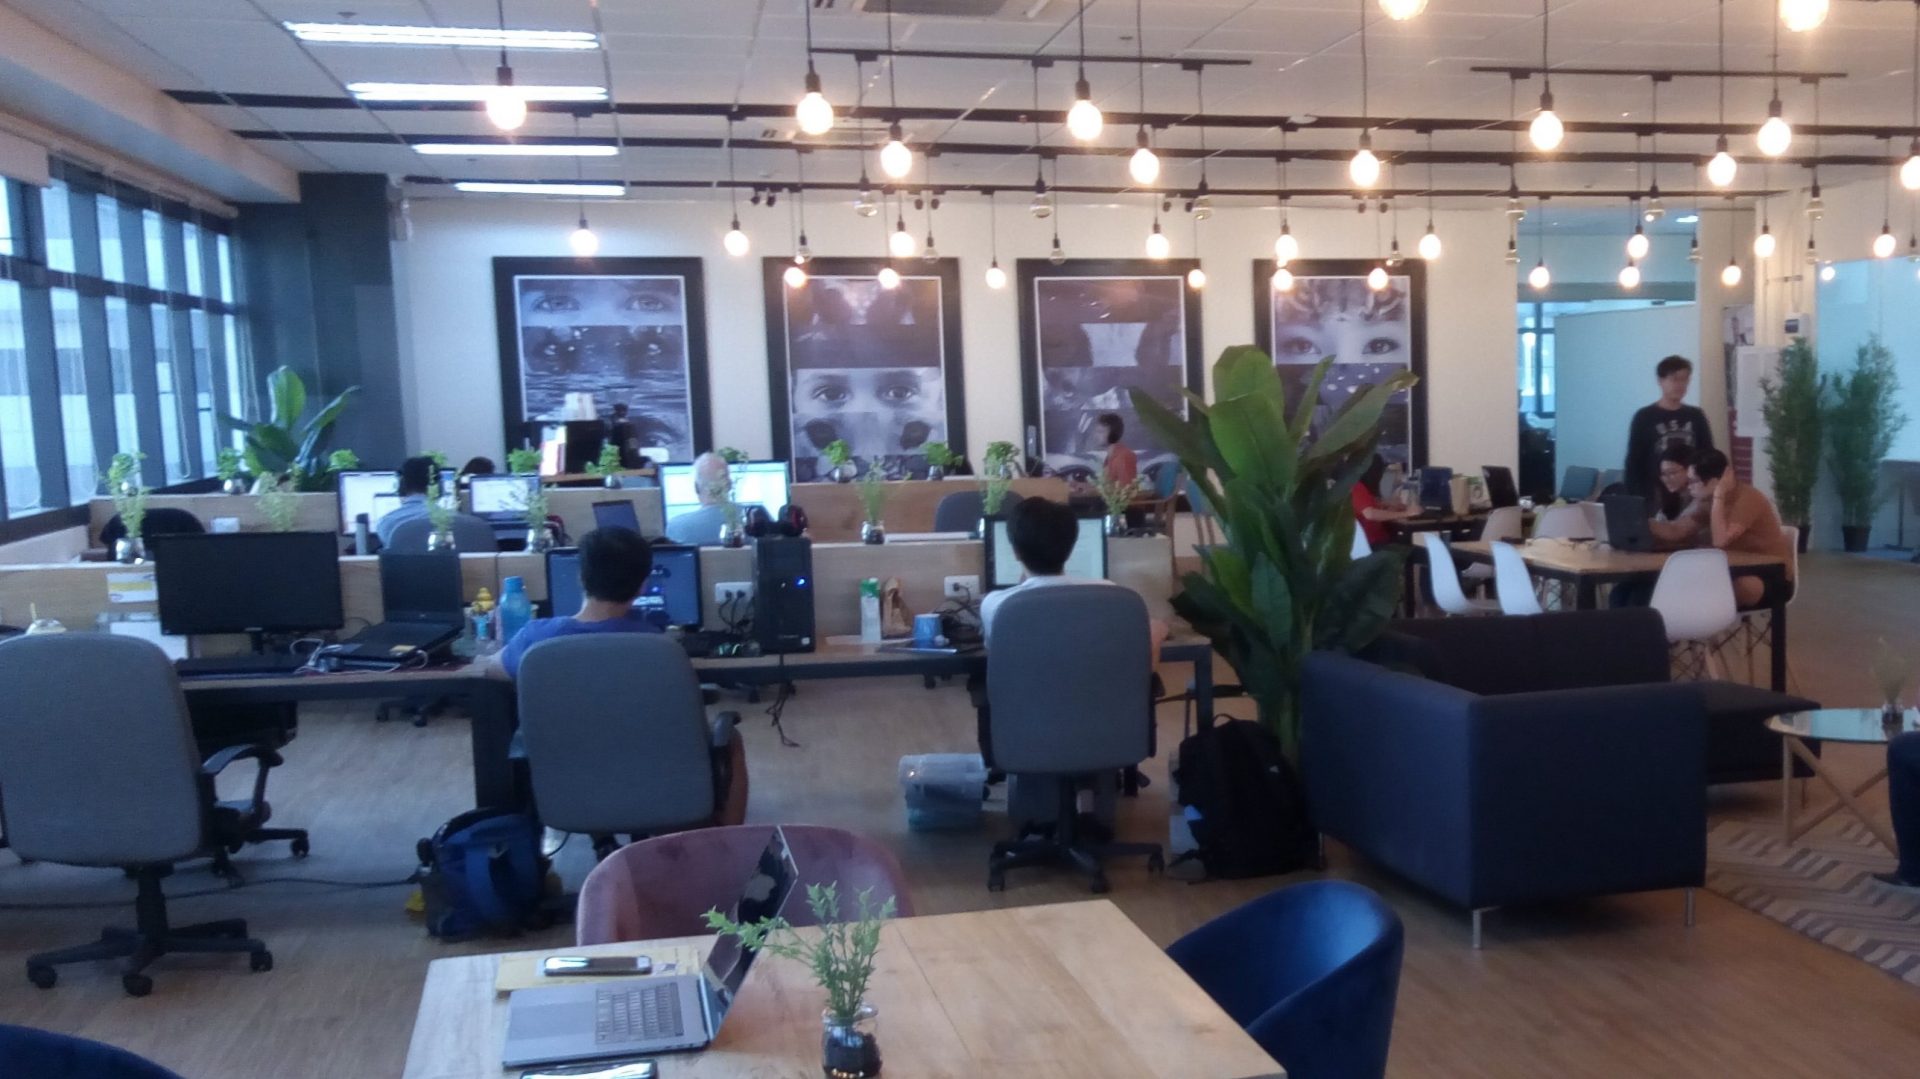 The Company IT Park: A Working Space for Professionals